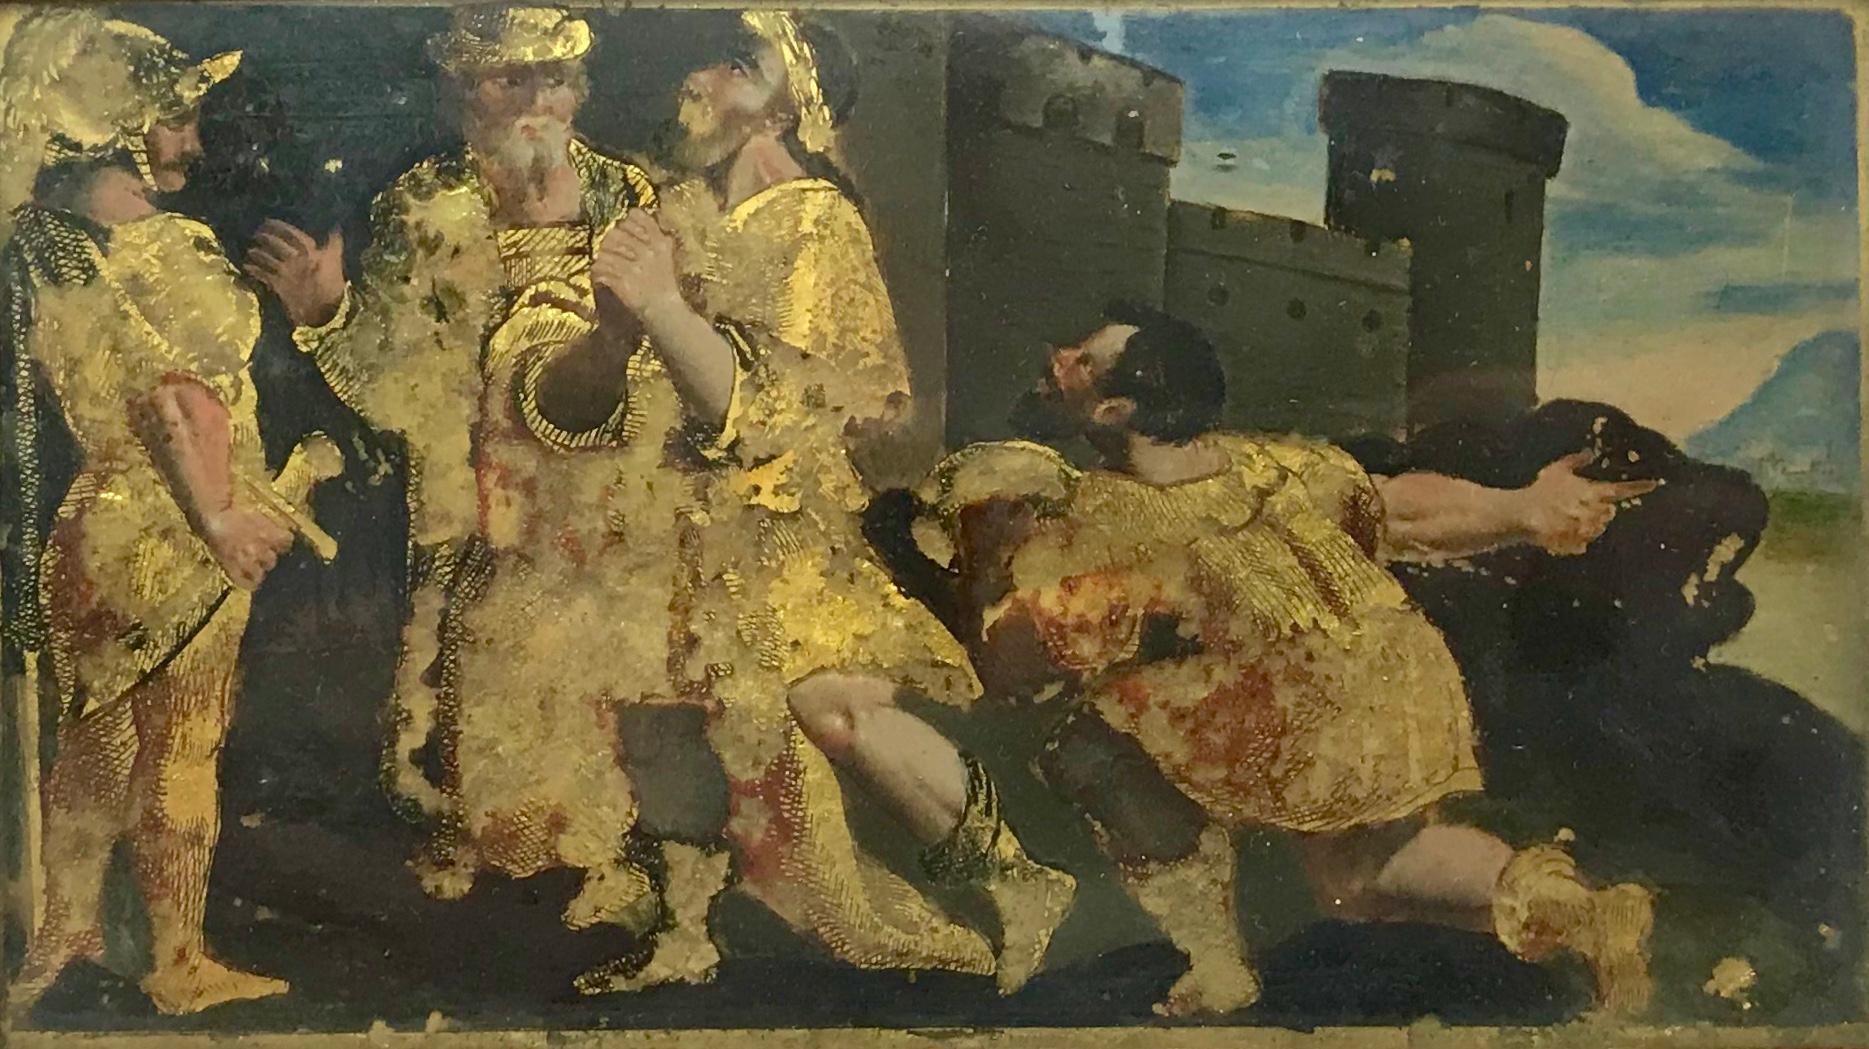 Verre églomisé painting of soldiers outside castle. Verre églomisé painting with grouping of four men in gilt tunics outside walled city; possibly Darius before Alexander, with gilt border in walnut frame. Italy, 17th century.
Dimensions: 8